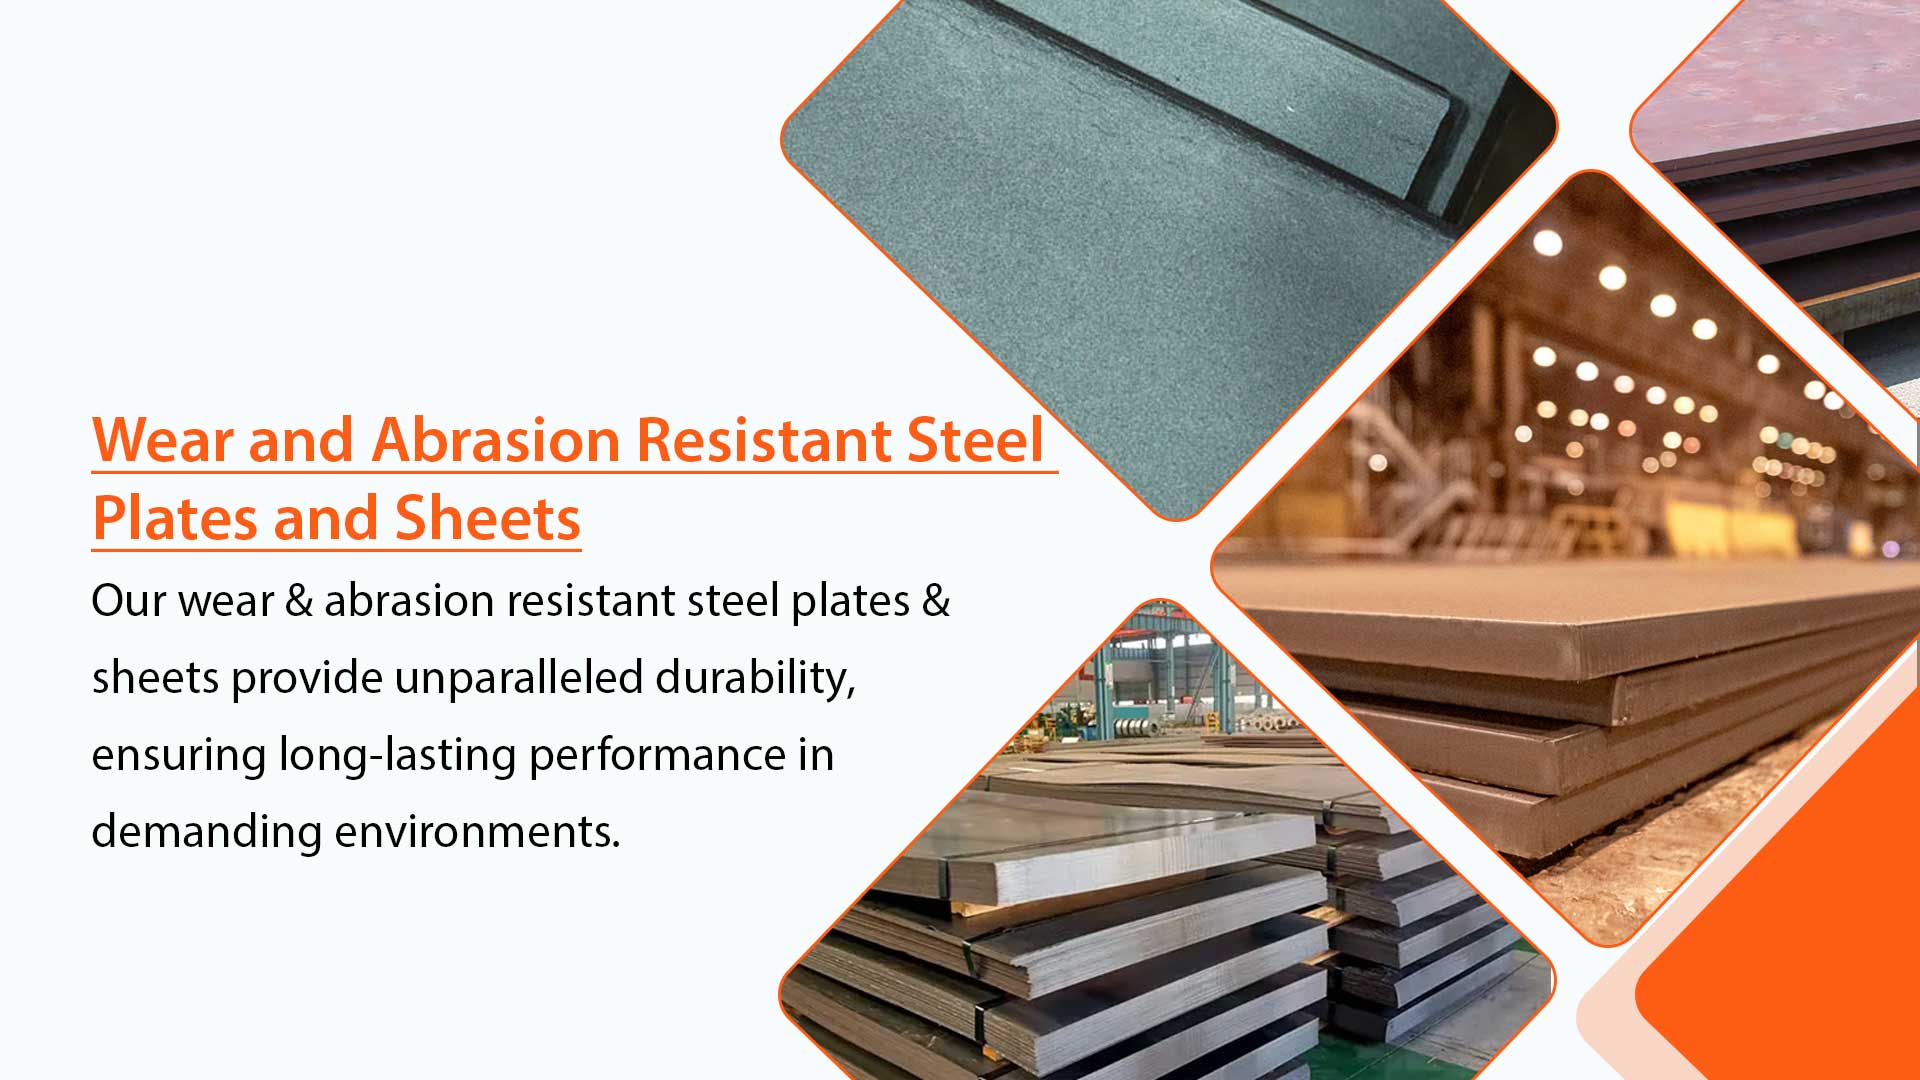 Wear and Abrasion Resistant Steel Plates and Sheets in Badangpet